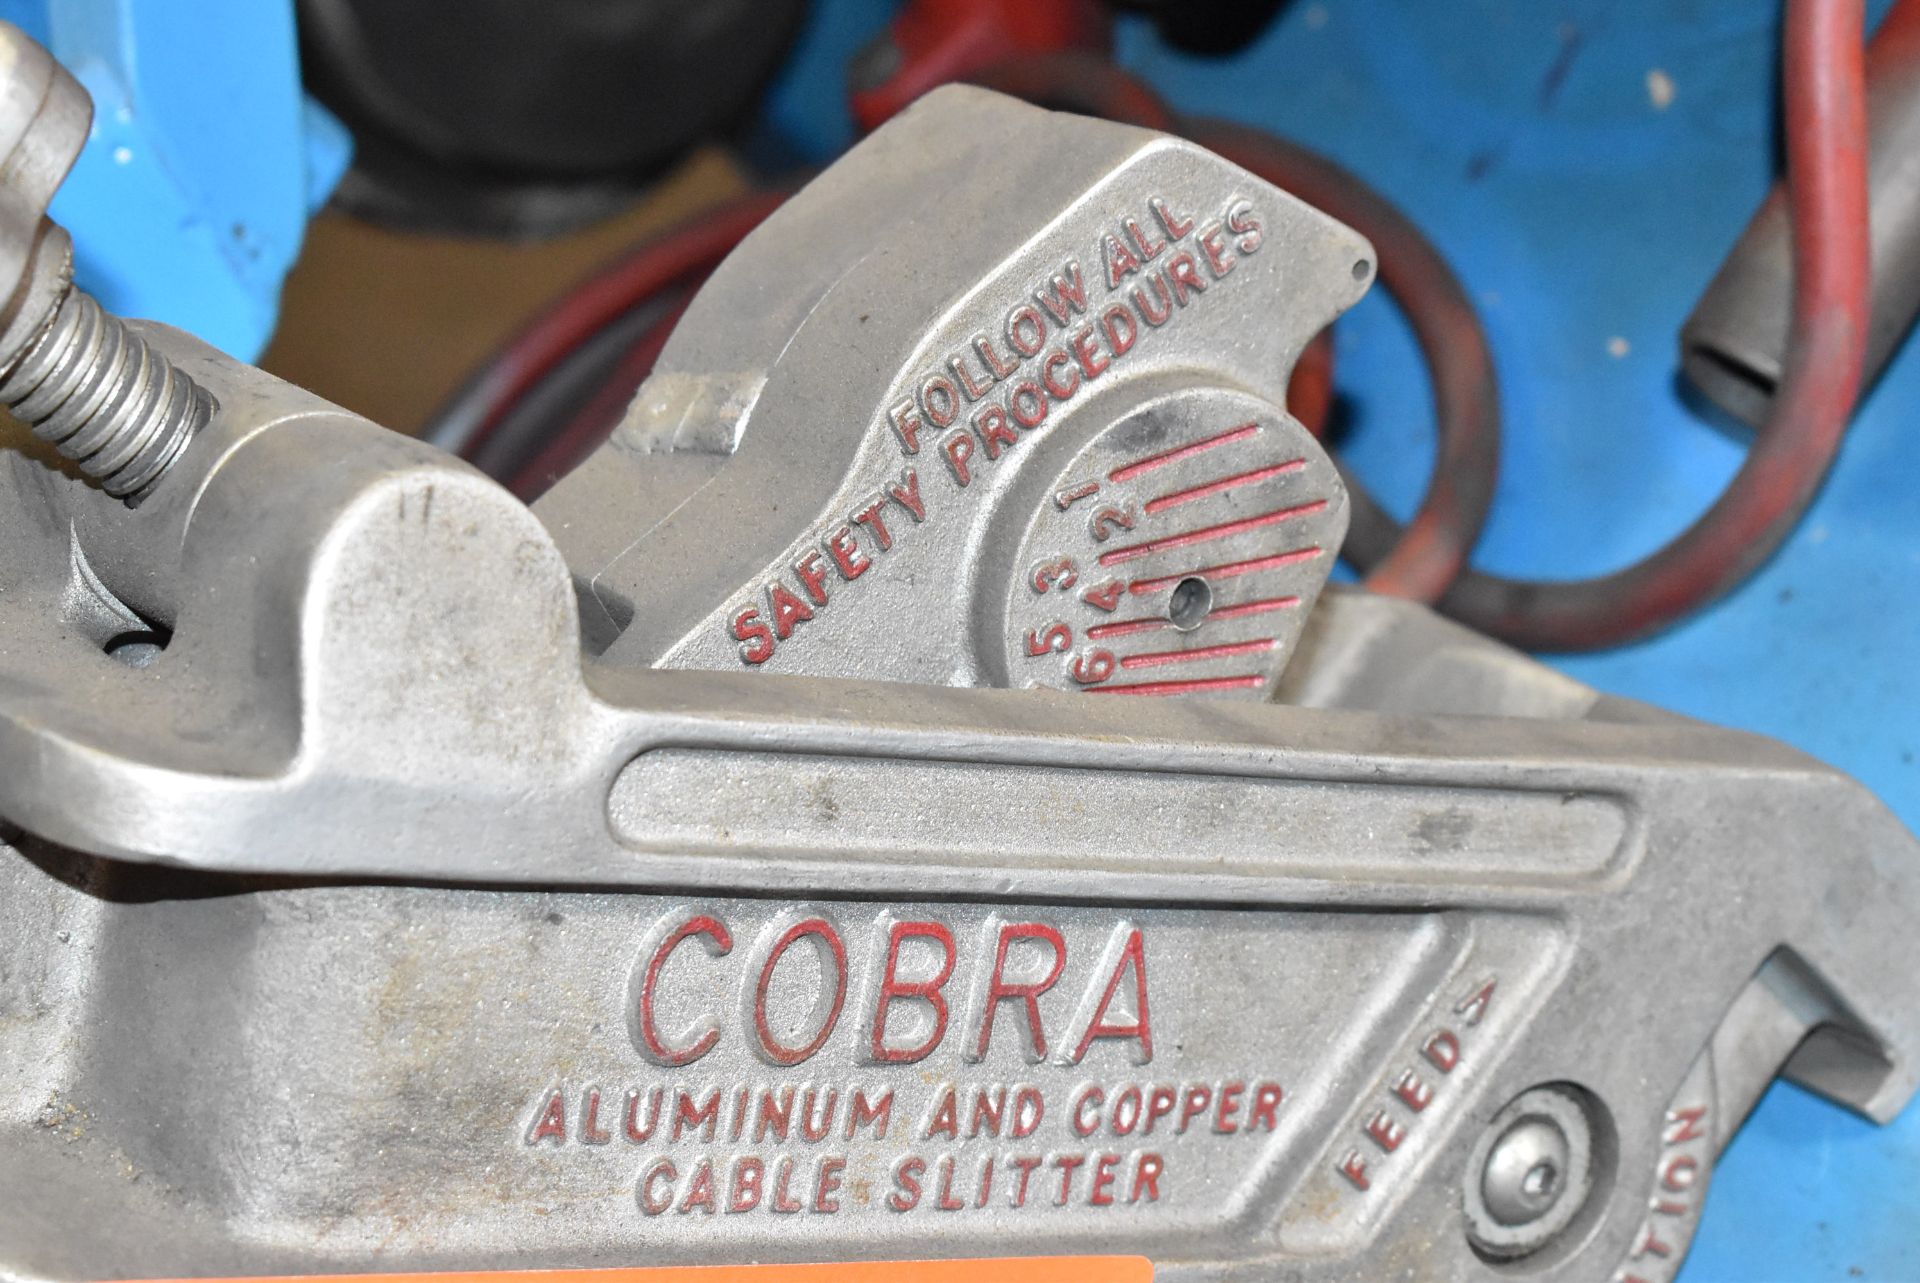 COBRA ALUMINUM AND COPPER CABLE SLITTER, S/N: N/A - Image 3 of 3